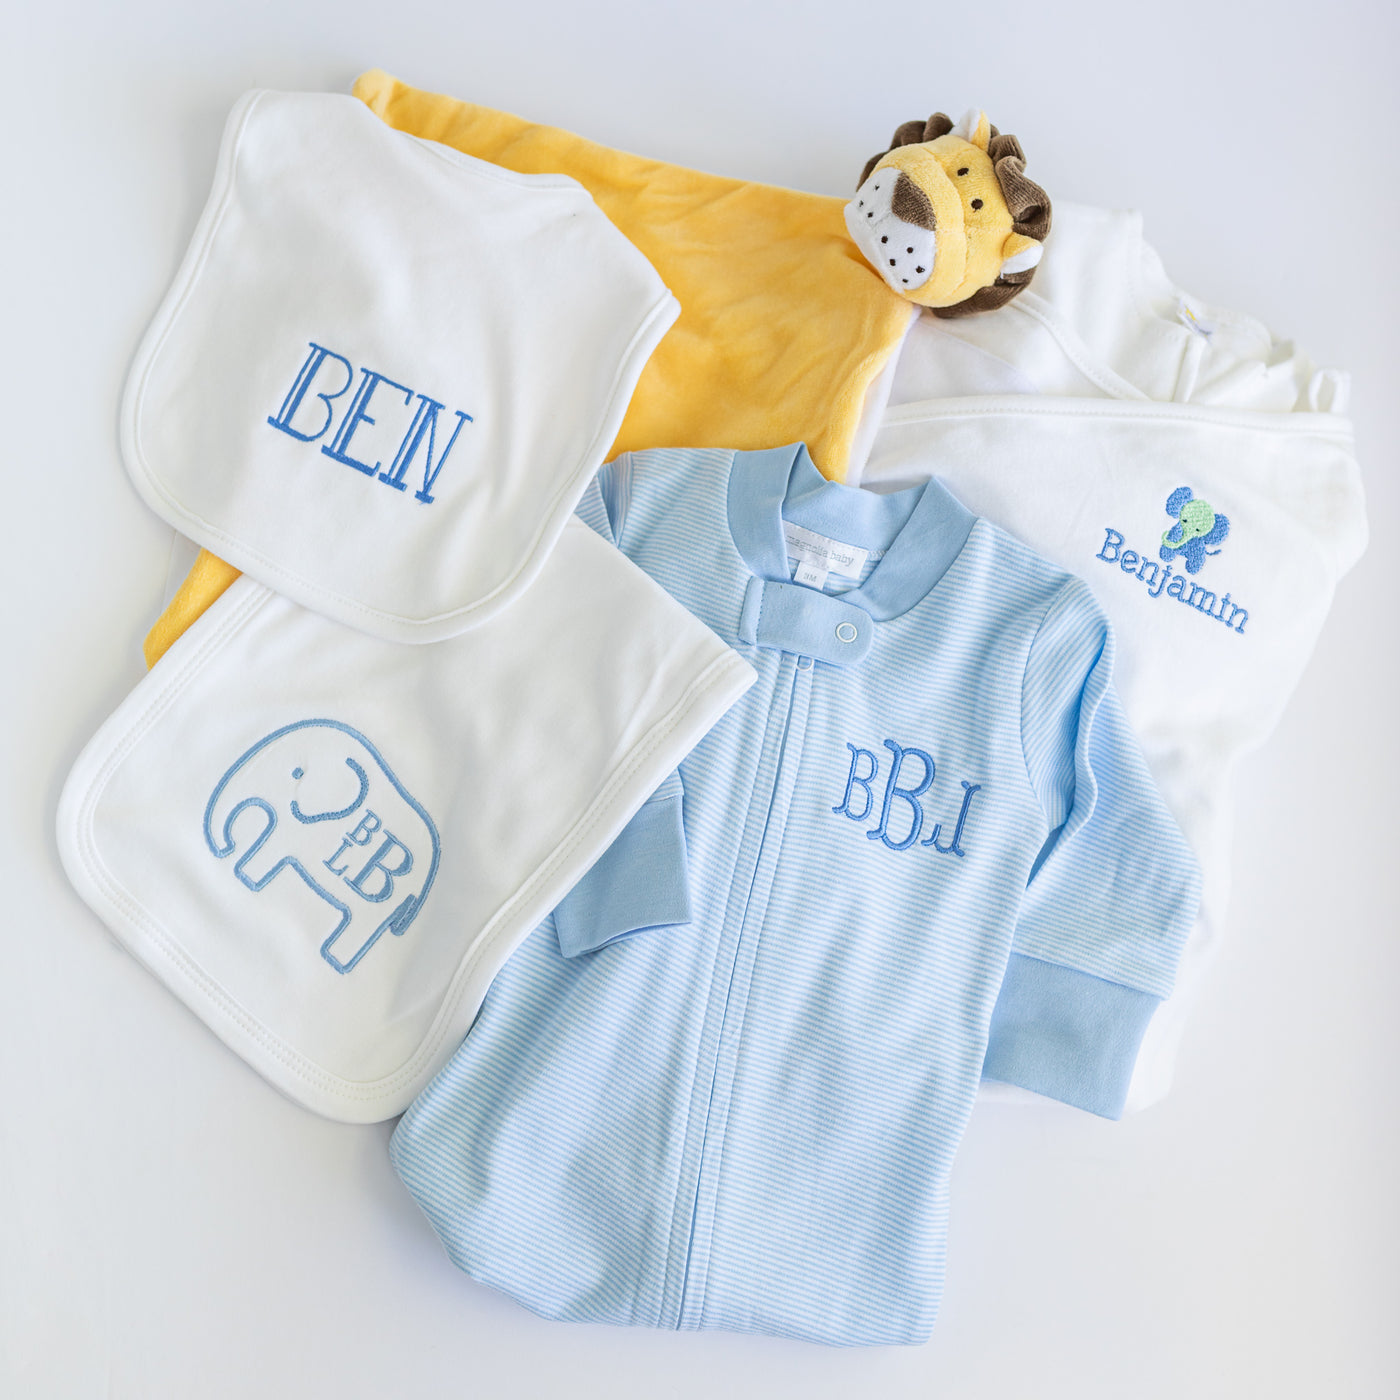 Welcome Home Baby Gift Set (2 options)